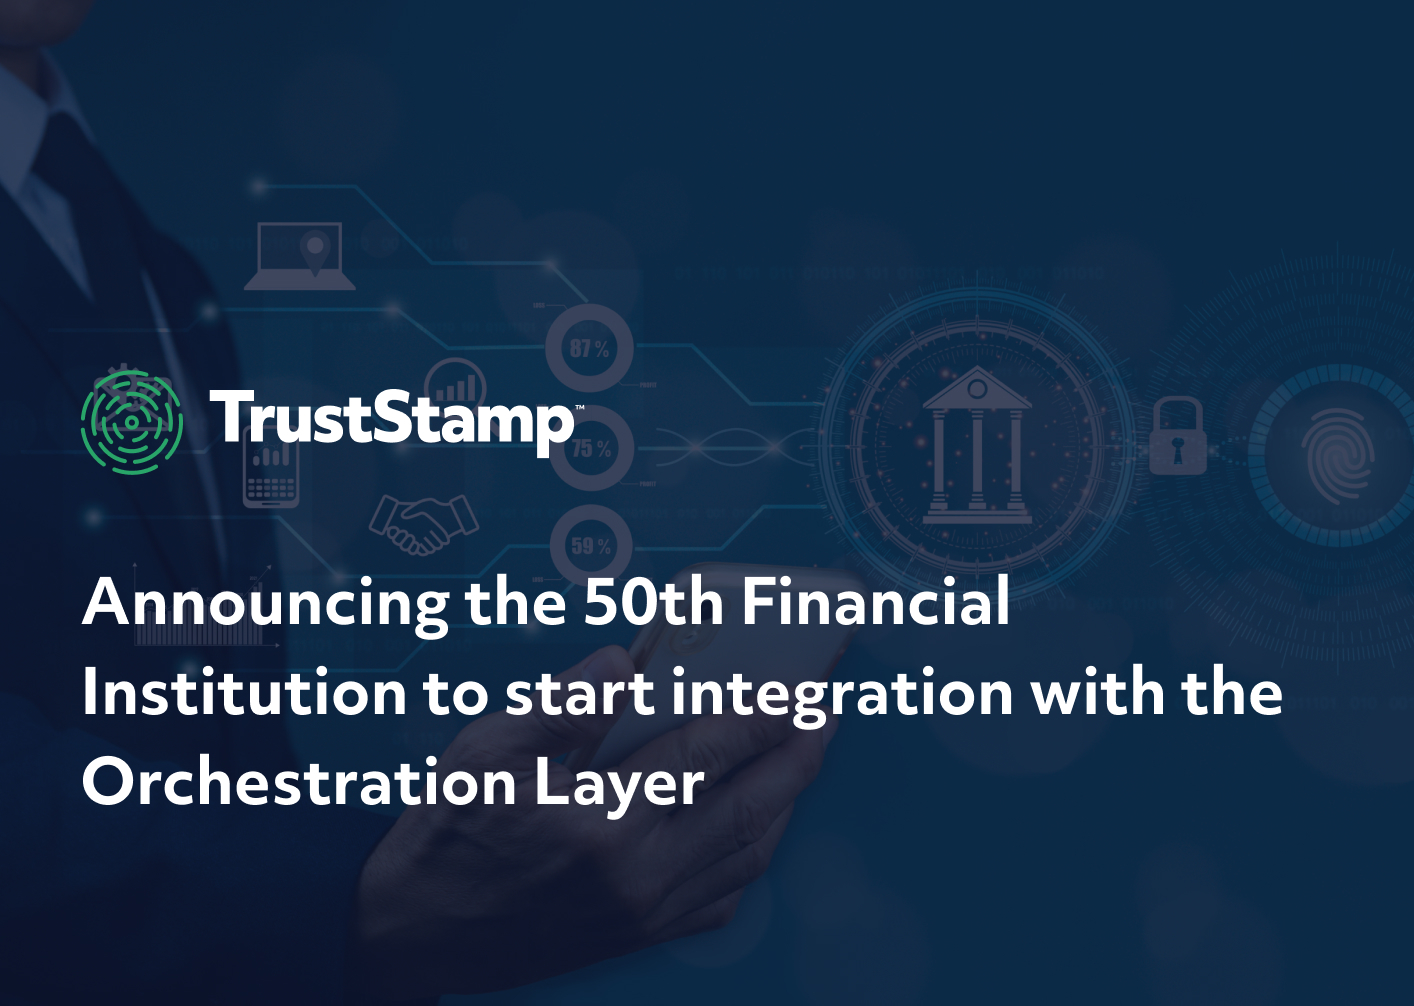 trust-stamp-announces-the-50th-financial-institution-to-start-integration-with-the-companys-orchestration-layer